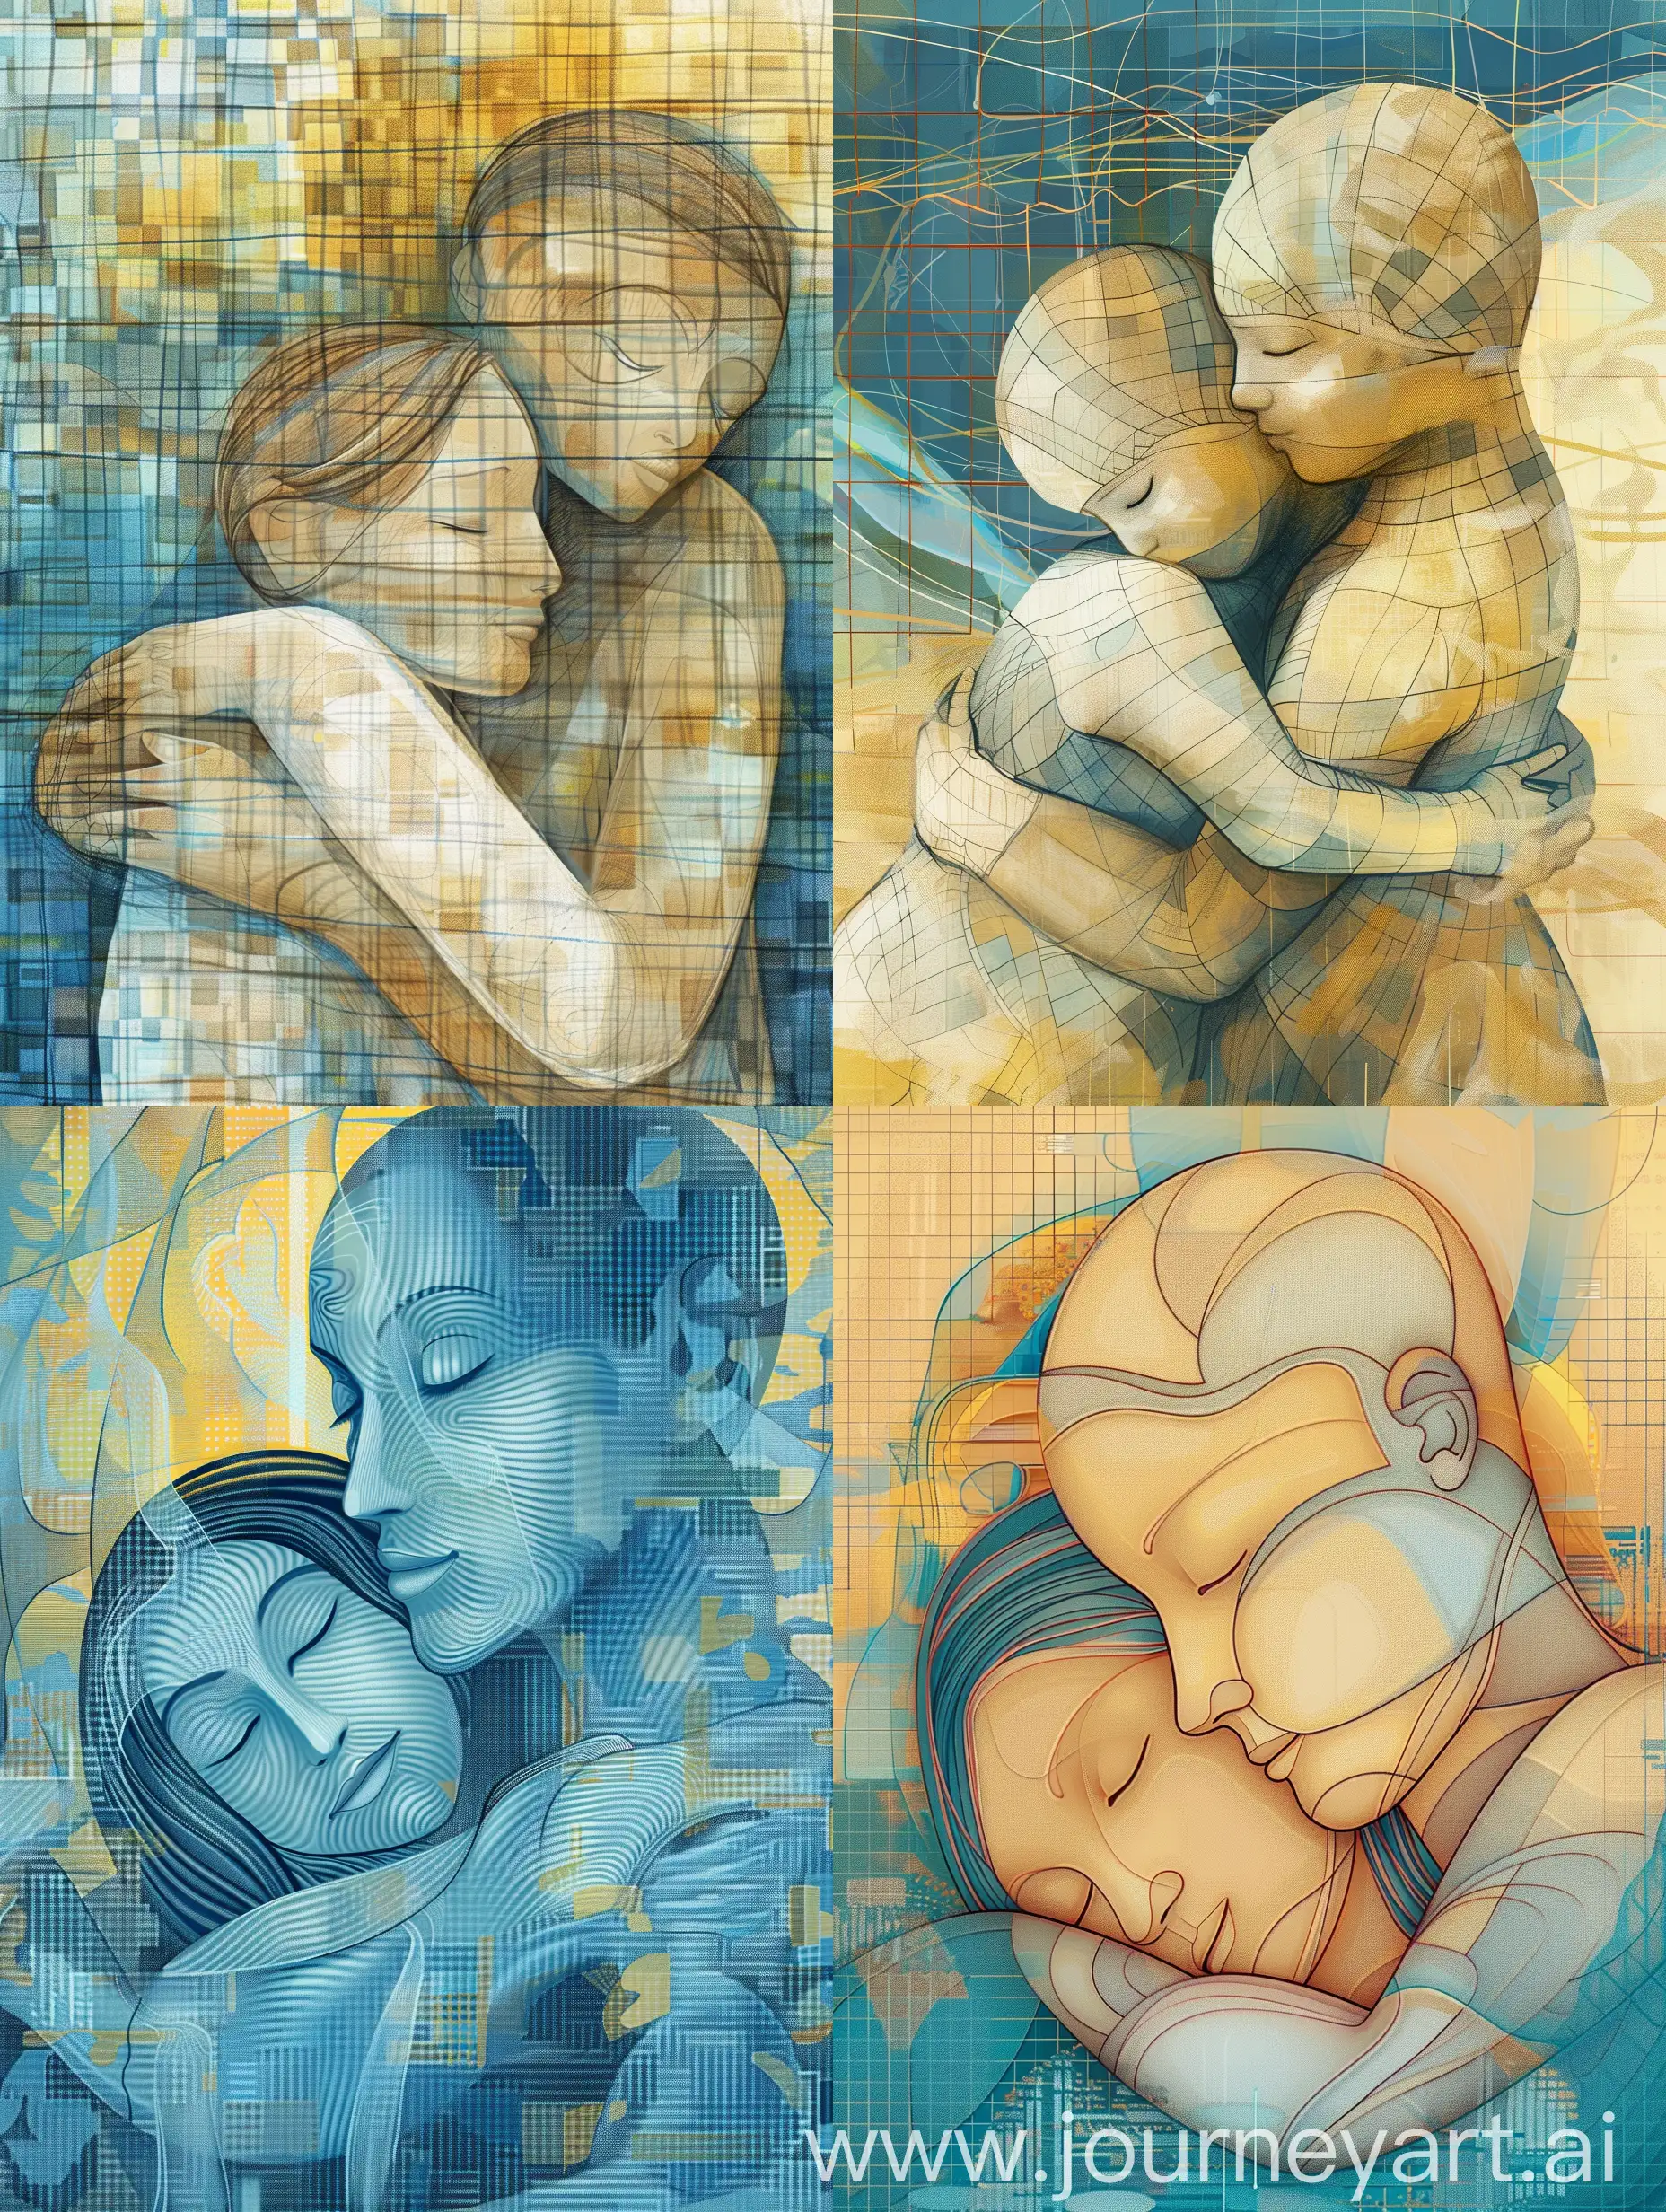 abstract art a stylized representation of two figures in a close embrace. The figures are depicted with simplified, smooth lines and appear to be sleeping or in a peaceful state. The background consists of a patterned design with blue and yellow tones, featuring a digital or pixelated motif that complements the tranquil and intimate moment captured between the two characters. The use of color and pattern in the background contrasts with the soft, organic forms of the figures, creating a visually striking composition.